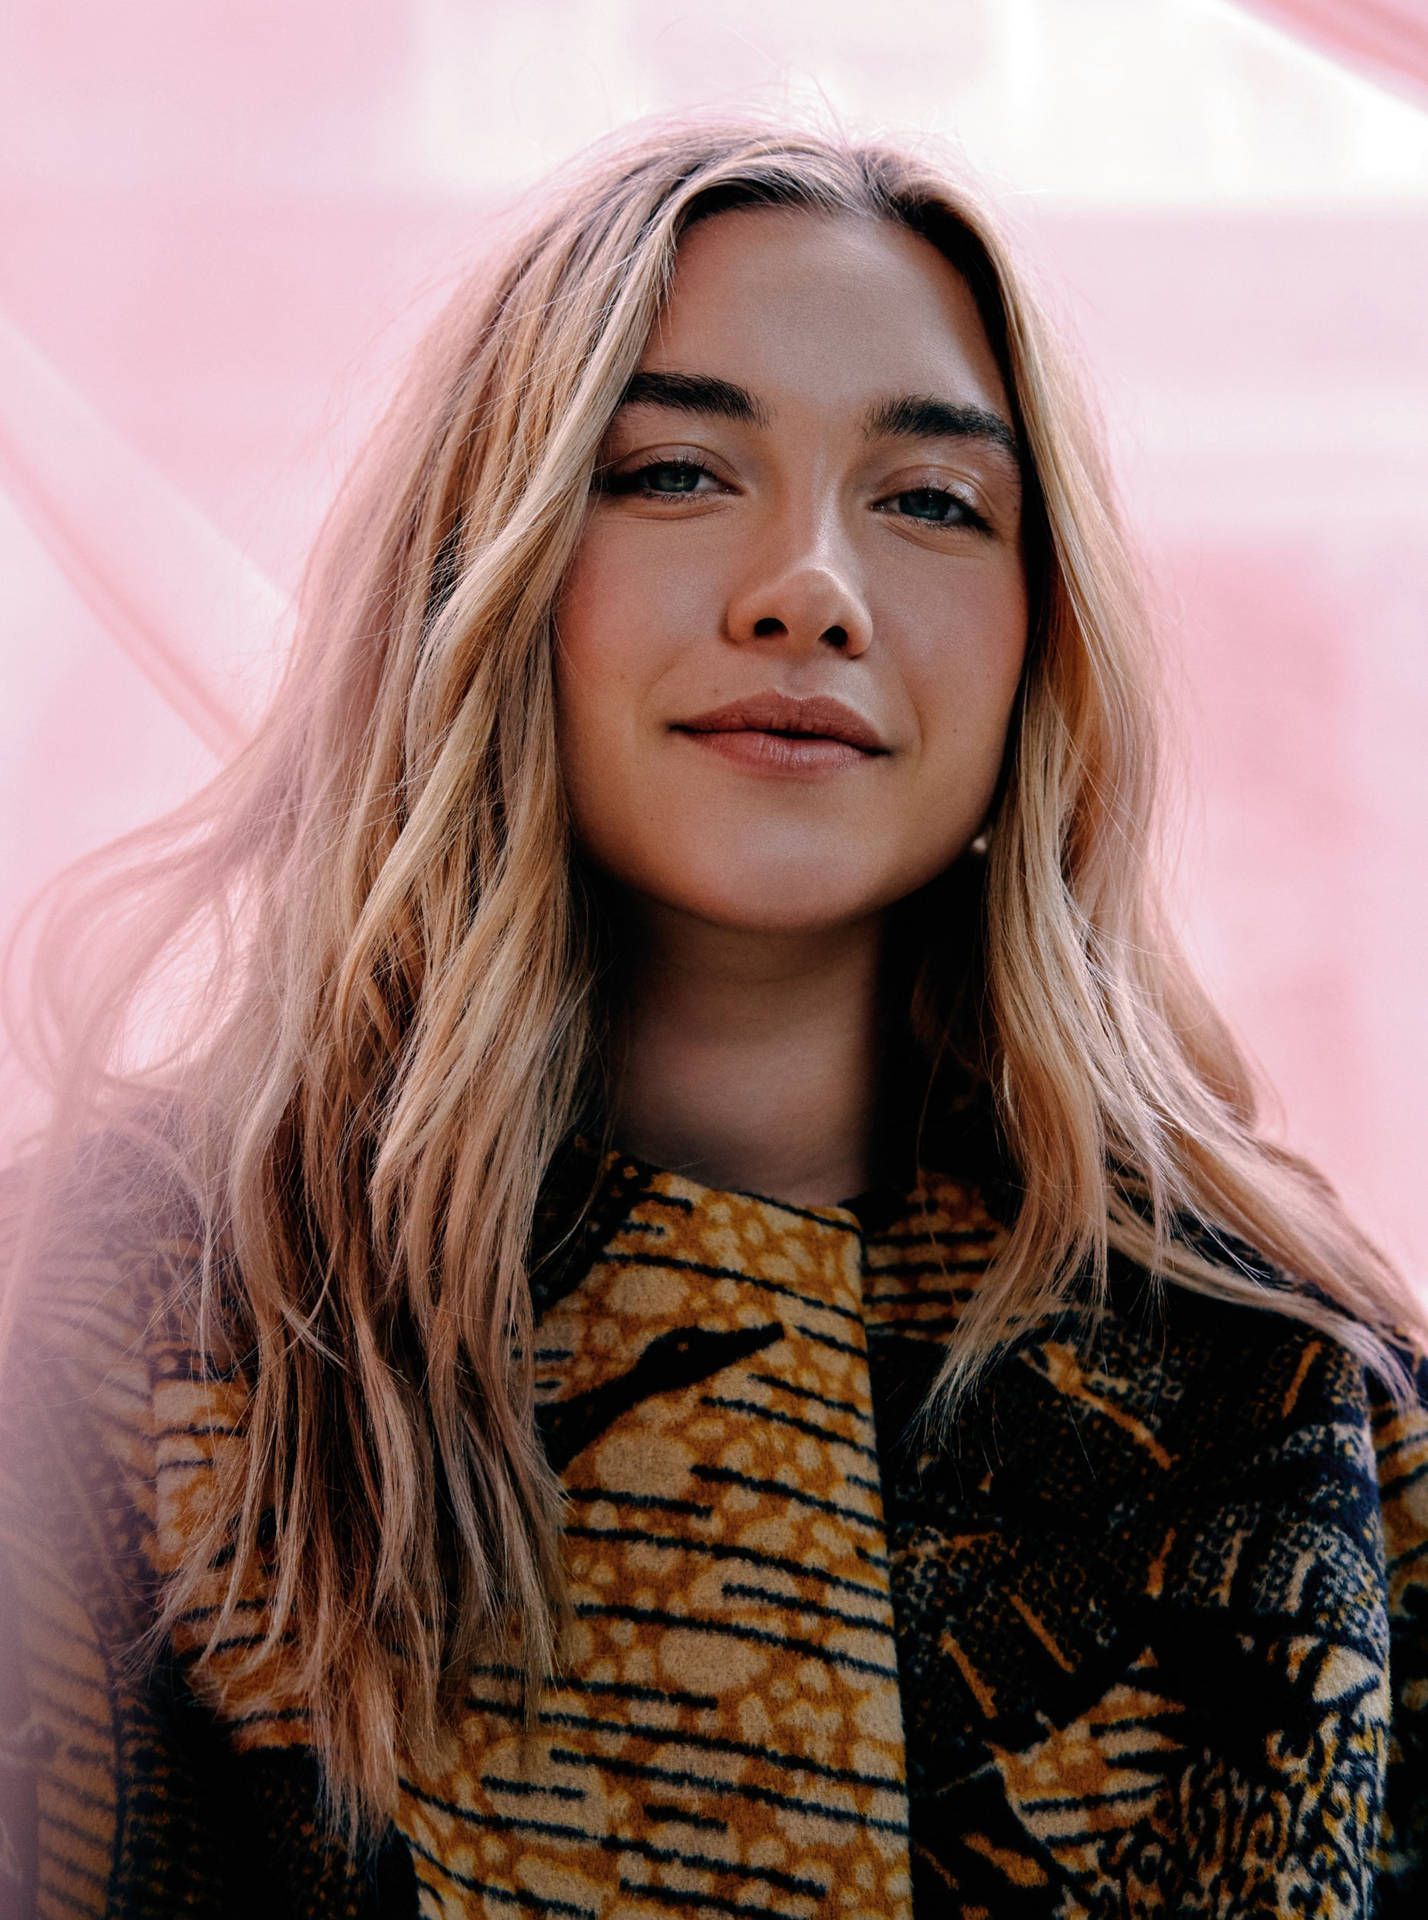 A woman with blonde hair and a coat with a tiger print. - Florence Pugh